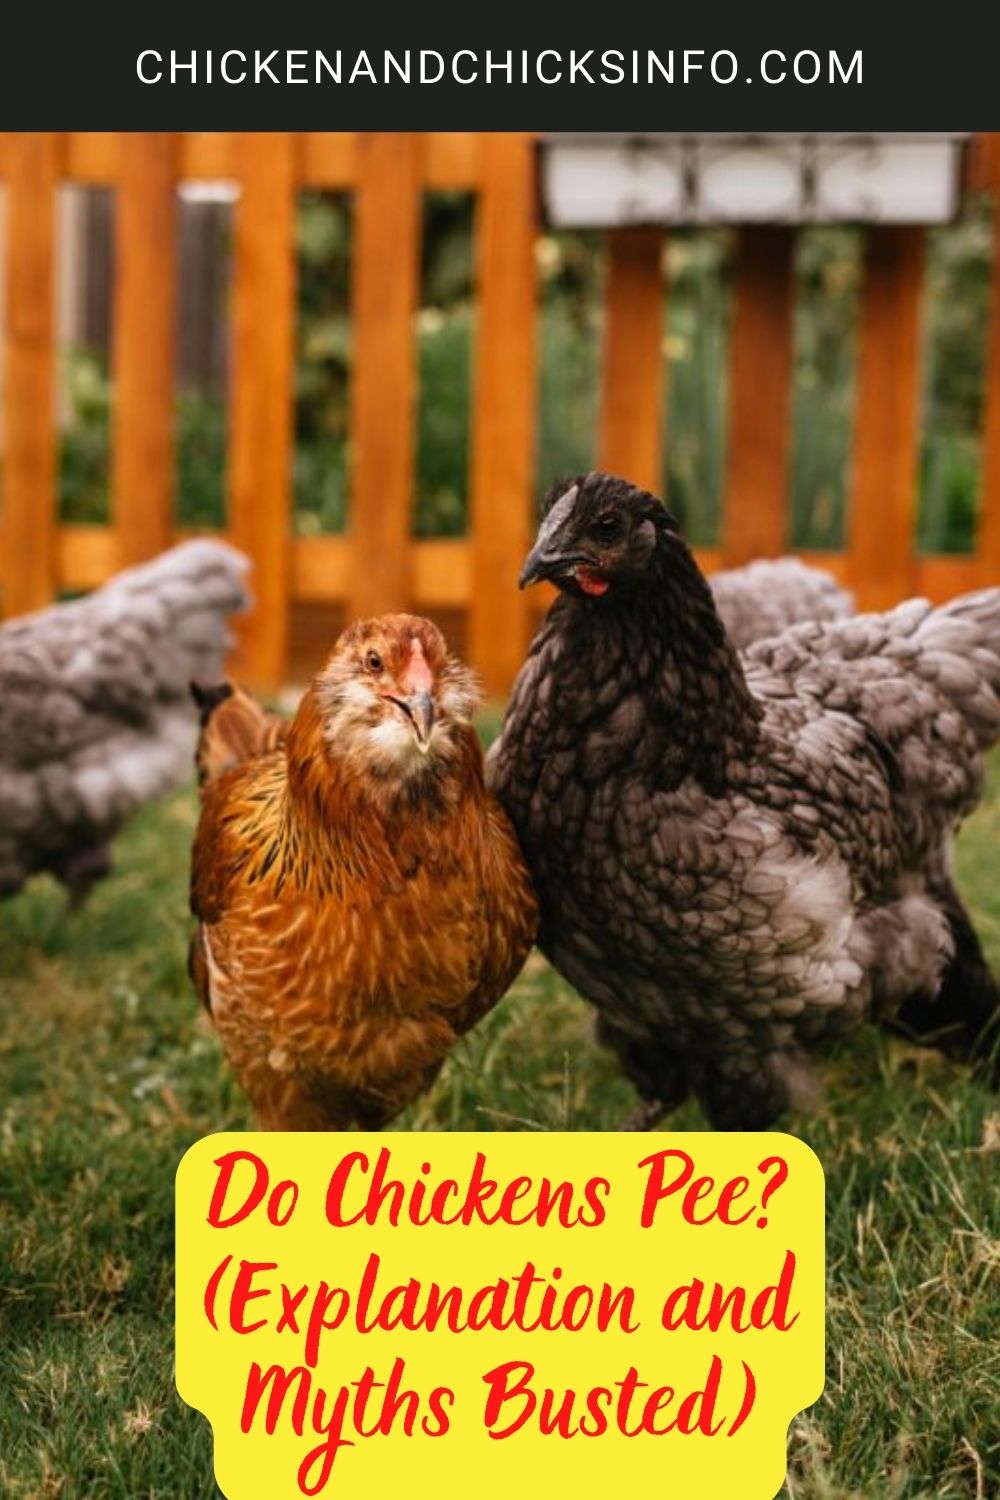 Do Chickens Pee? (Explanation and Myths Busted) poster.
